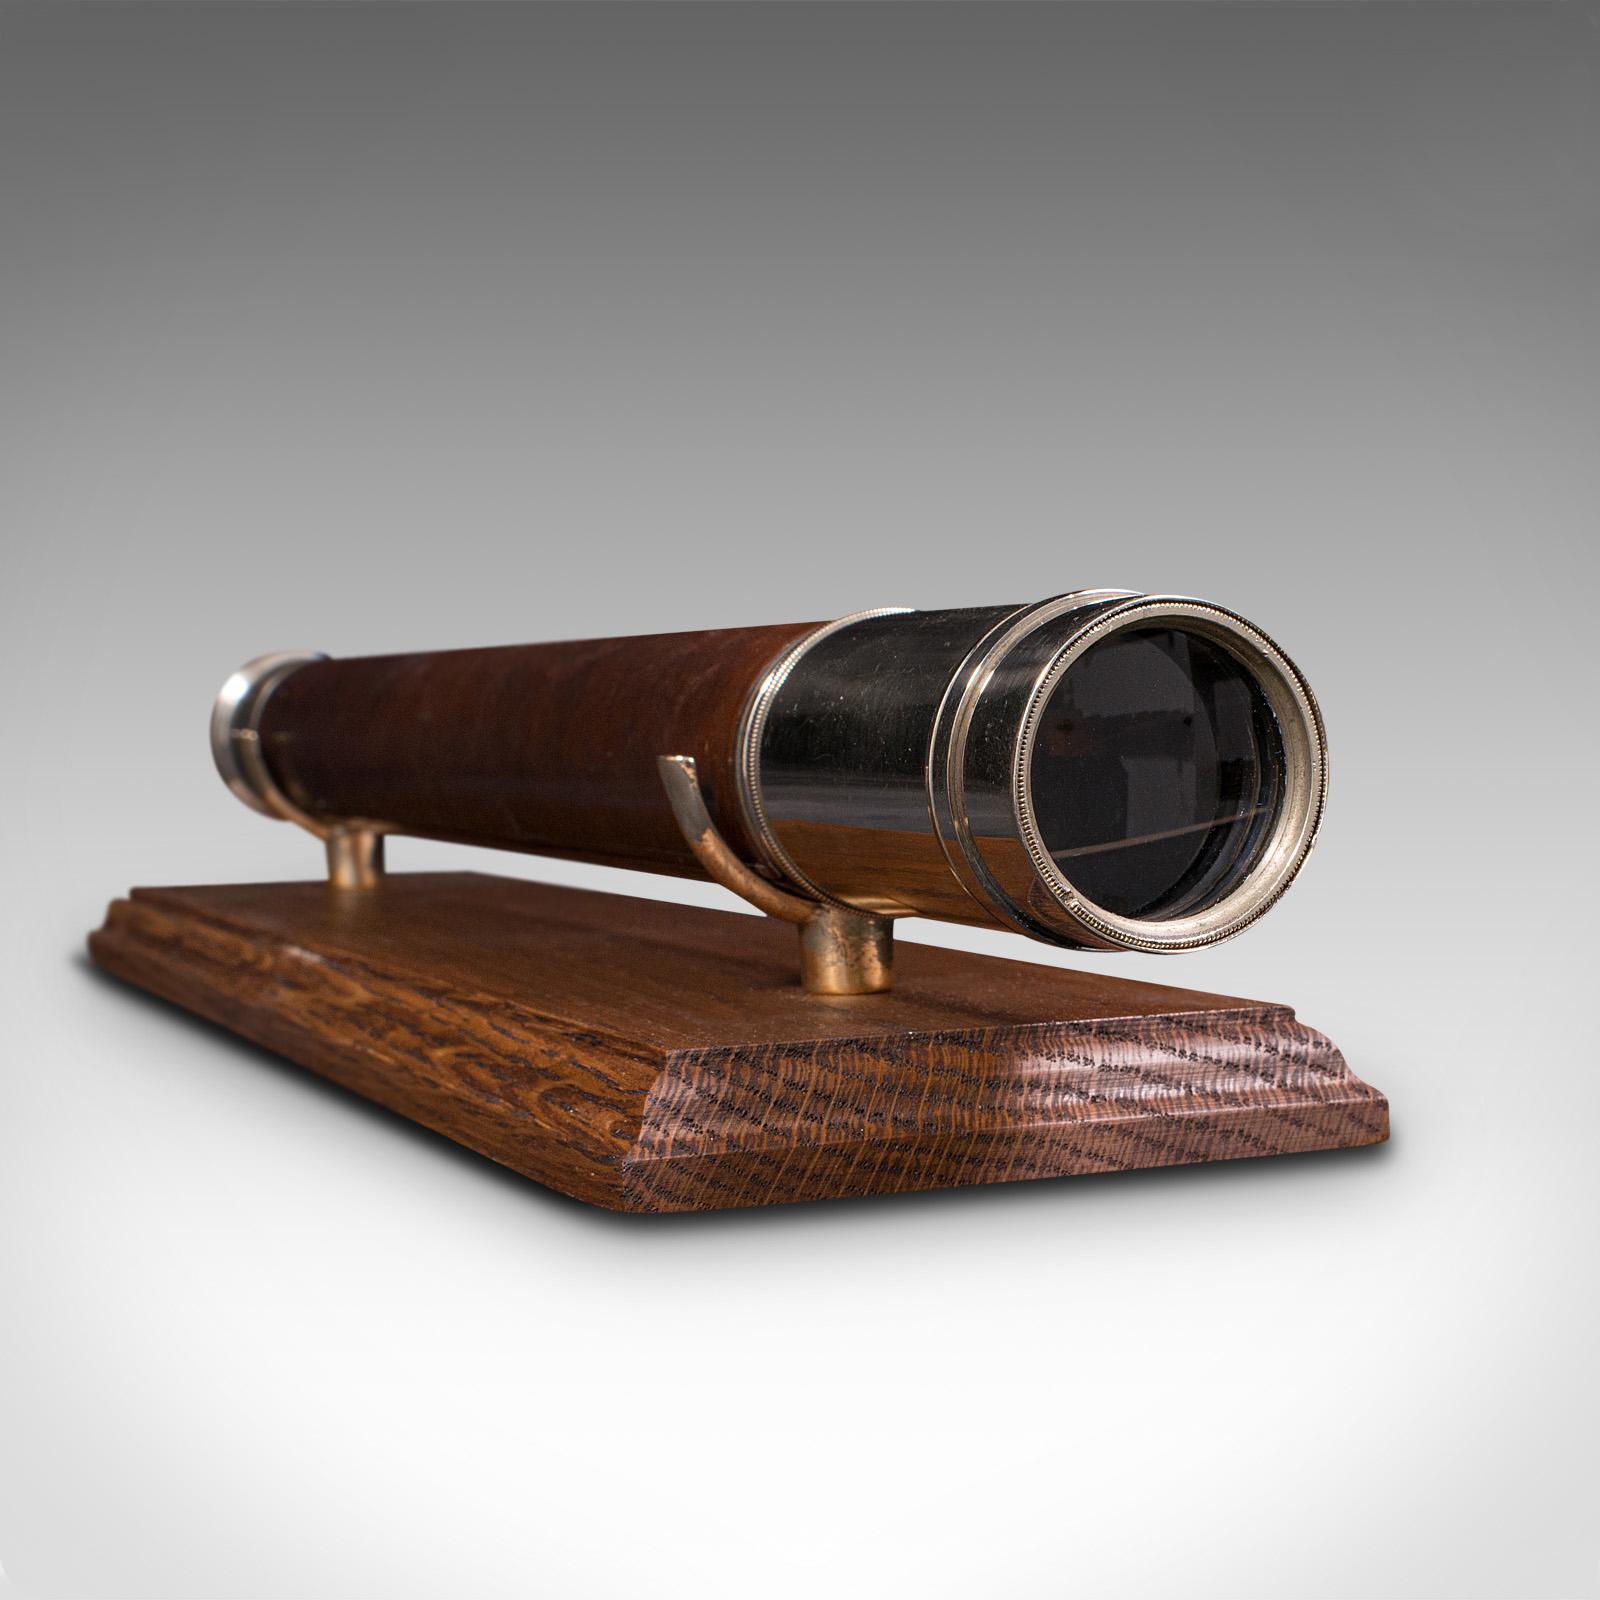 19th Century Antique Officer of the Watch Telescope, English, Terrestrial, Astronomical, Ross For Sale